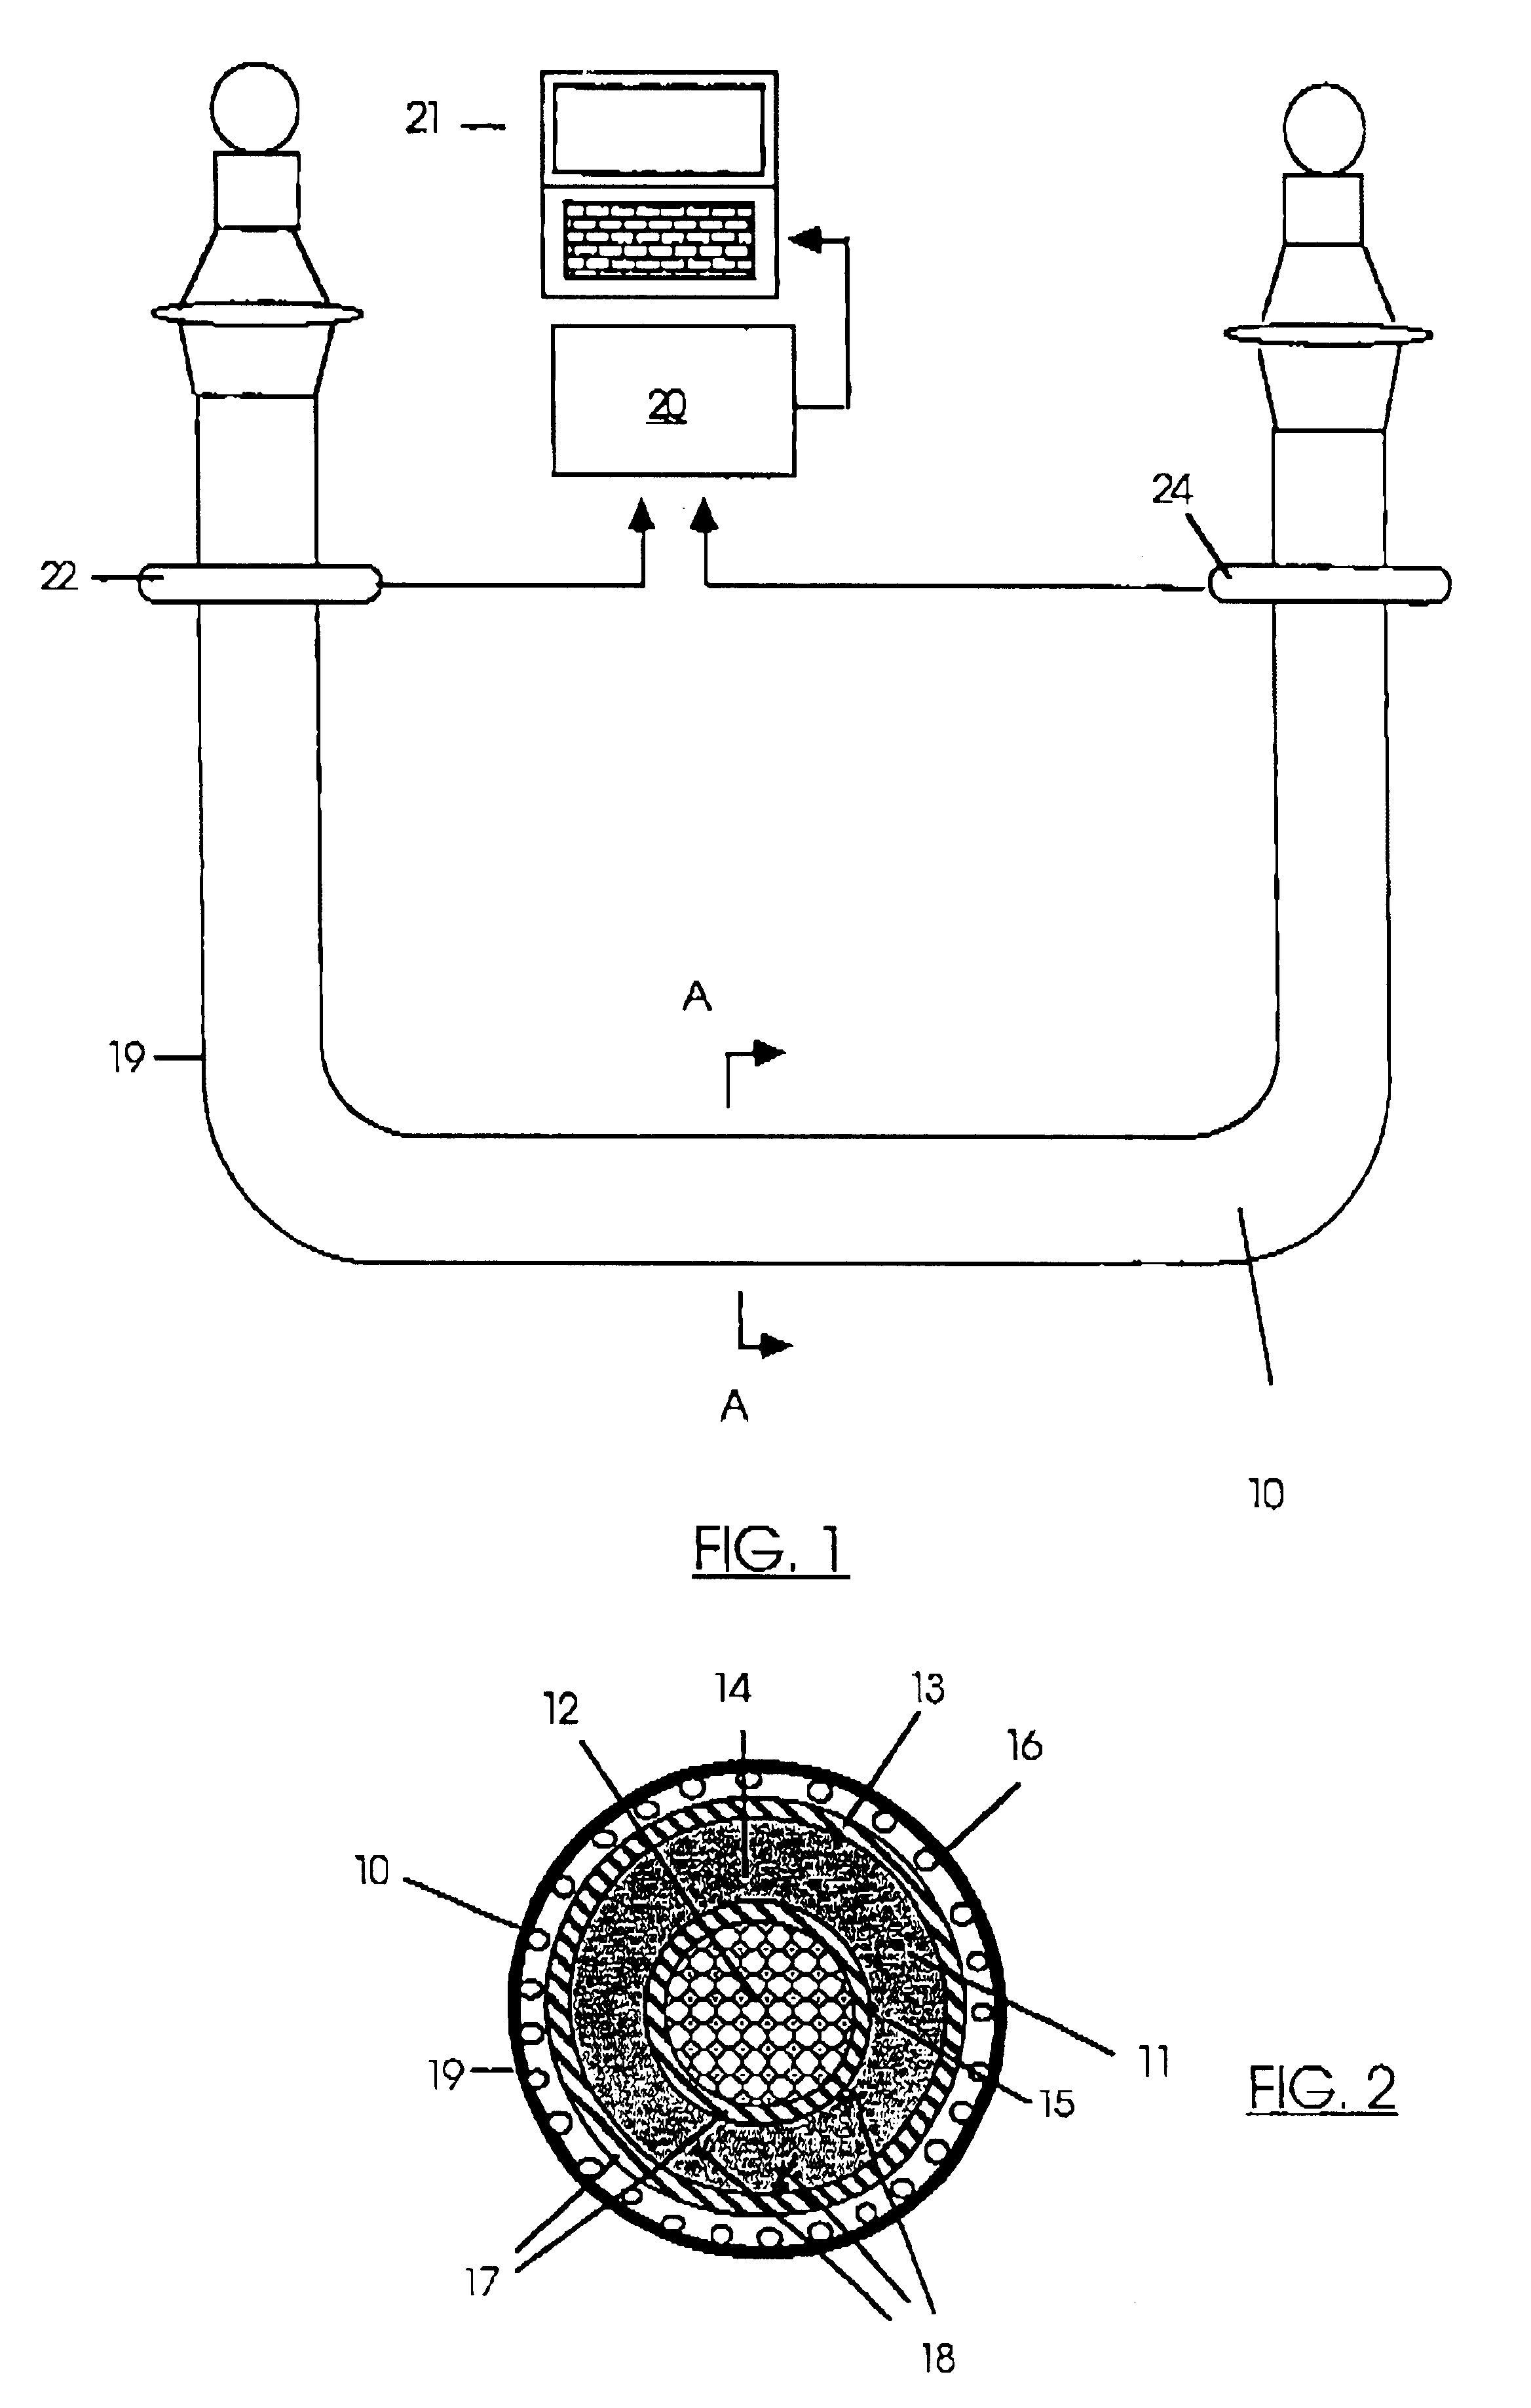 Method for diagnosing insulation degradation in underground cable